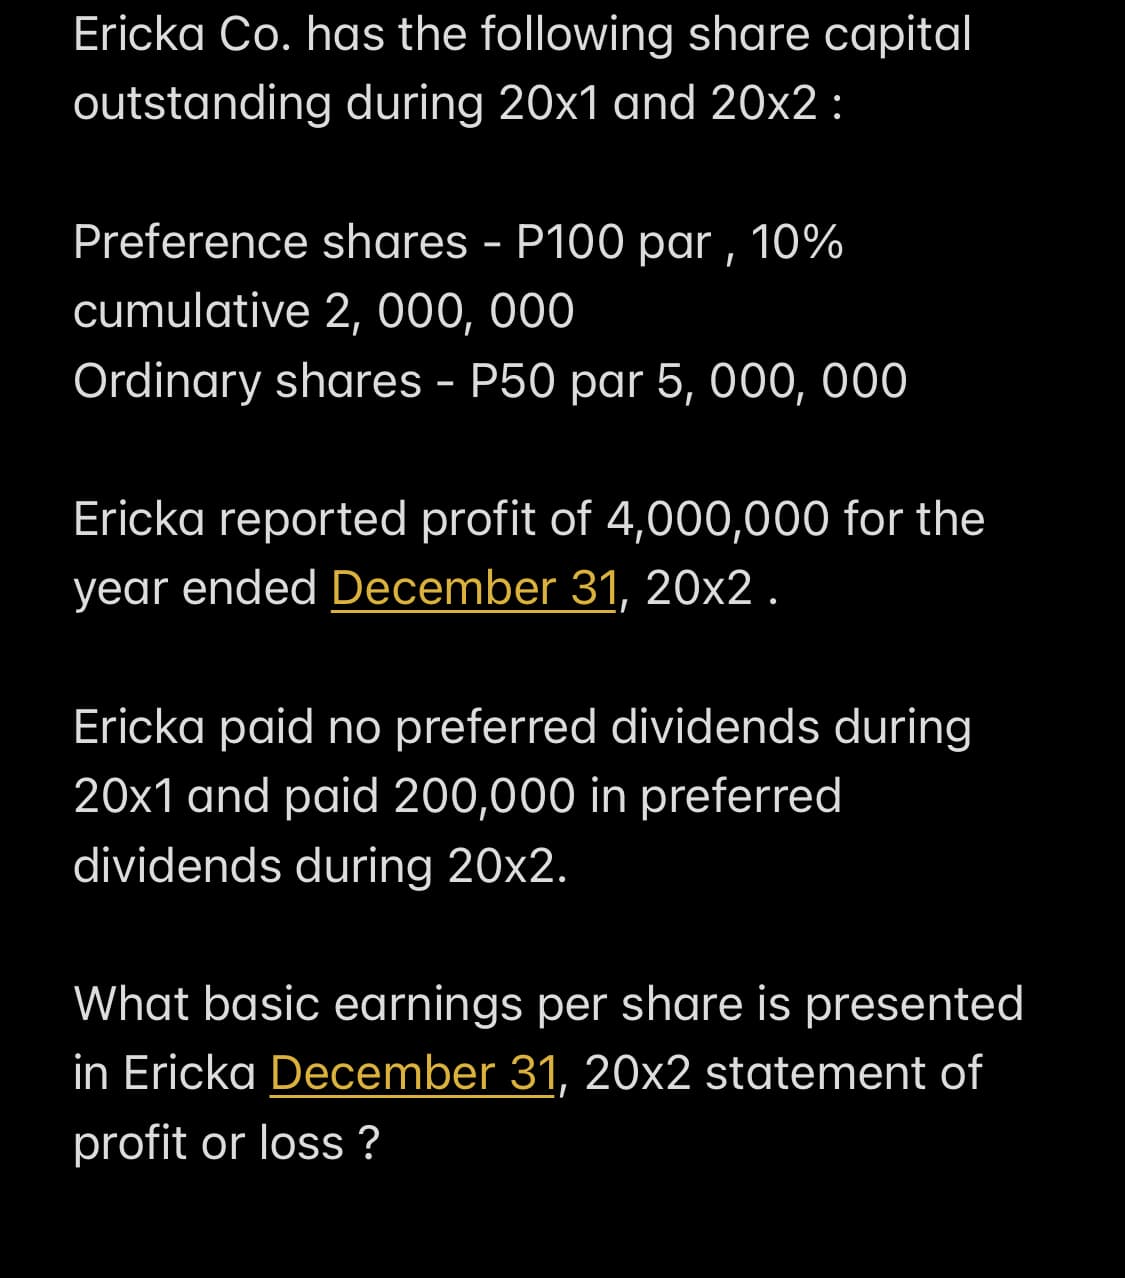 Ericka Co. has the following share capital
outstanding during 20x1 and 20x2 :
Preference shares - P100 par , 10%
cumulative 2, 000, 000
Ordinary shares - P50 par 5, 000, 000
Ericka reported profit of 4,000,000 for the
year ended December 31, 20x2 .
Ericka paid no preferred dividends during
20x1 and paid 200,000 in preferred
dividends during 20x2.
What basic earnings per share is presented
in Ericka December 31, 20x2 statement of
profit or loss ?
